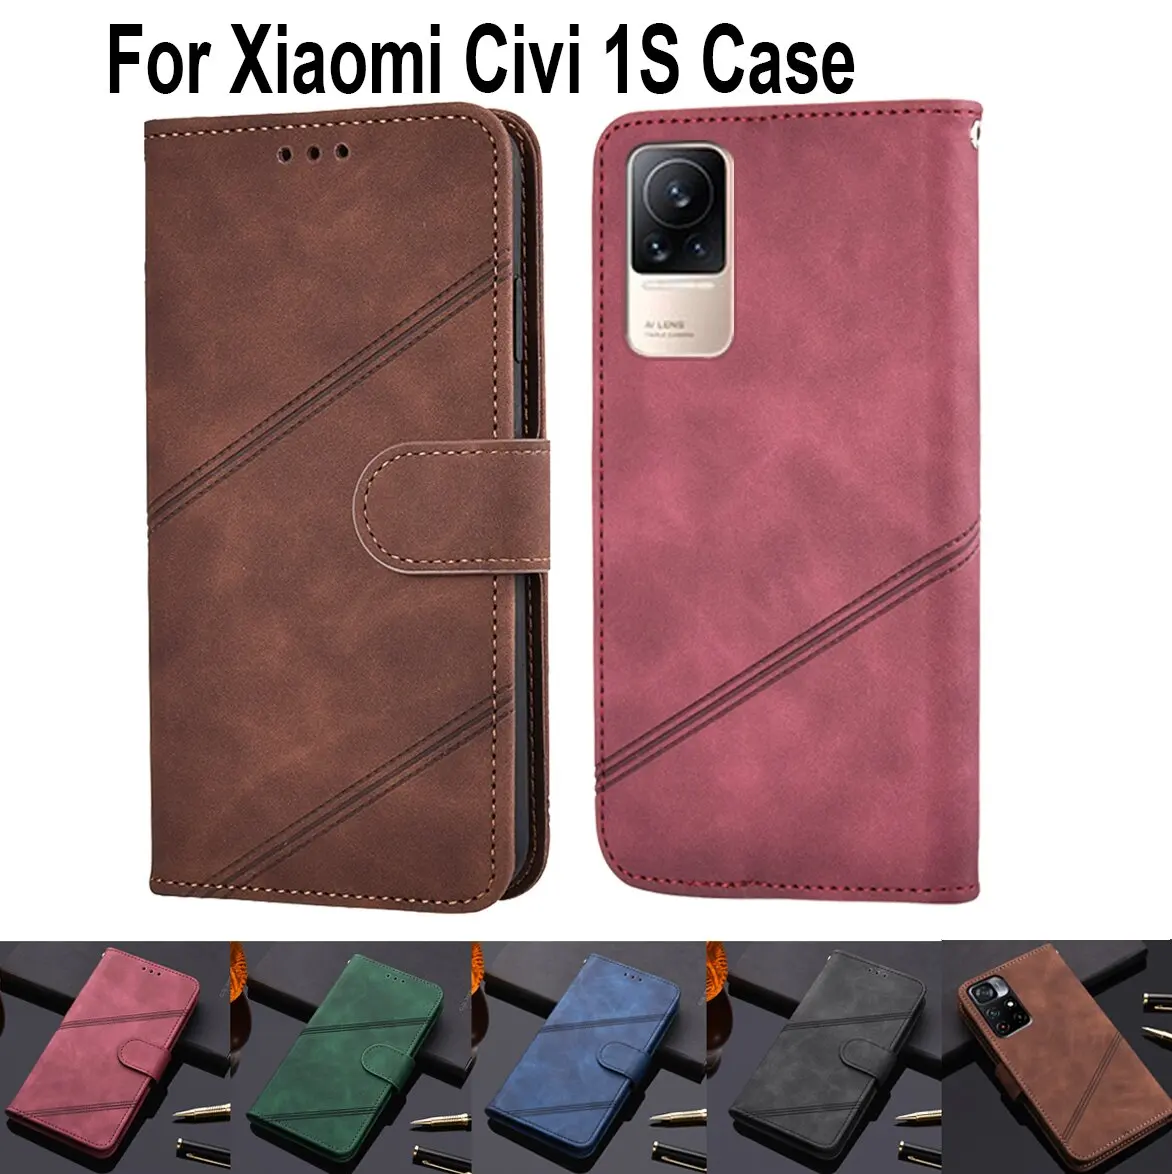 

Luxury Wallet Flip Cover For Xiaomi Civi 1S Protective Phone Case For Xiaomi Civi 1S Leather Vintage Shell Coque Capa